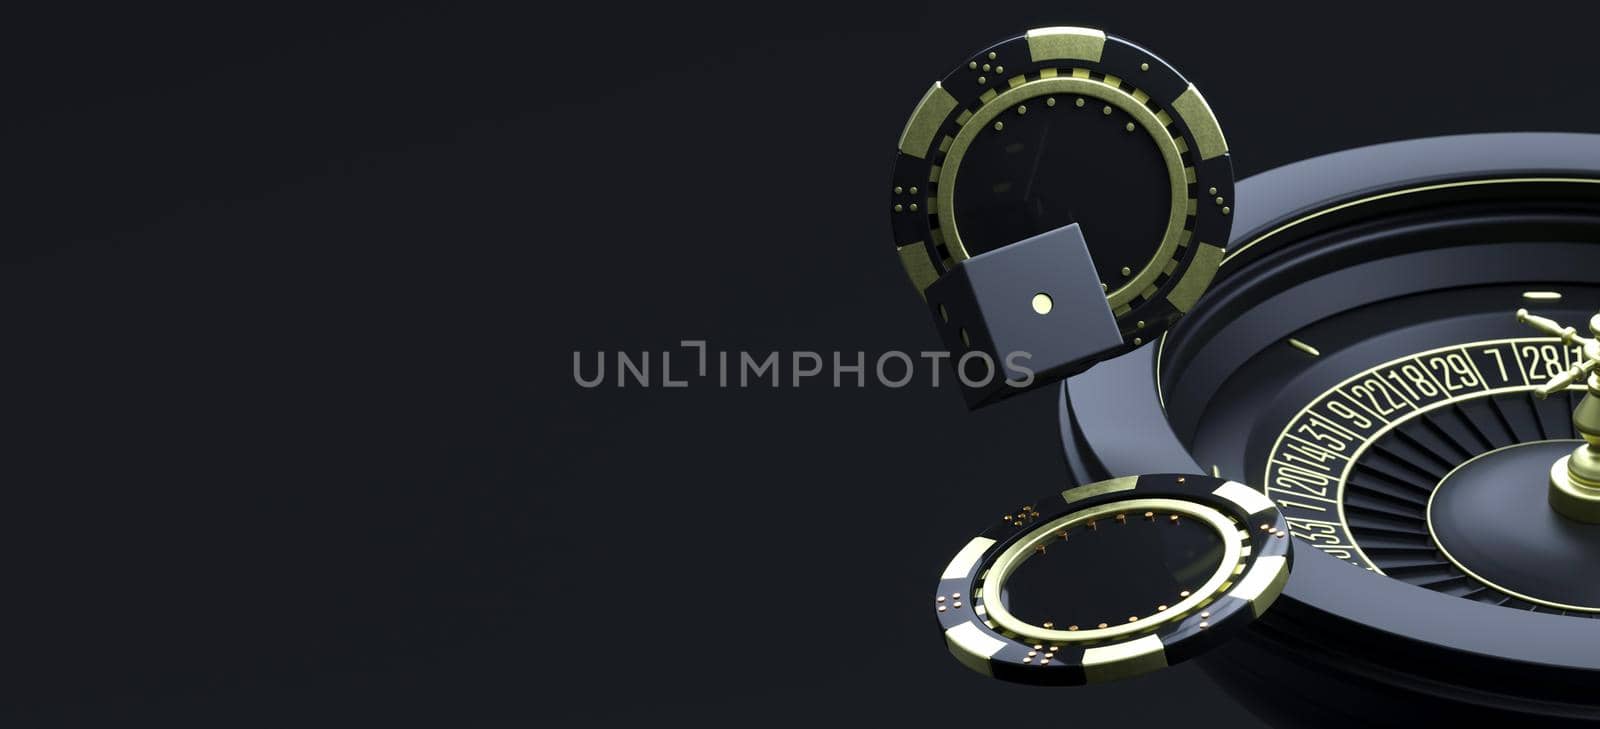 Modern casino background with place for text. Luxury casino roulette wheel on black background with copy space. Online casino theme. Poker game table. 3d rendering